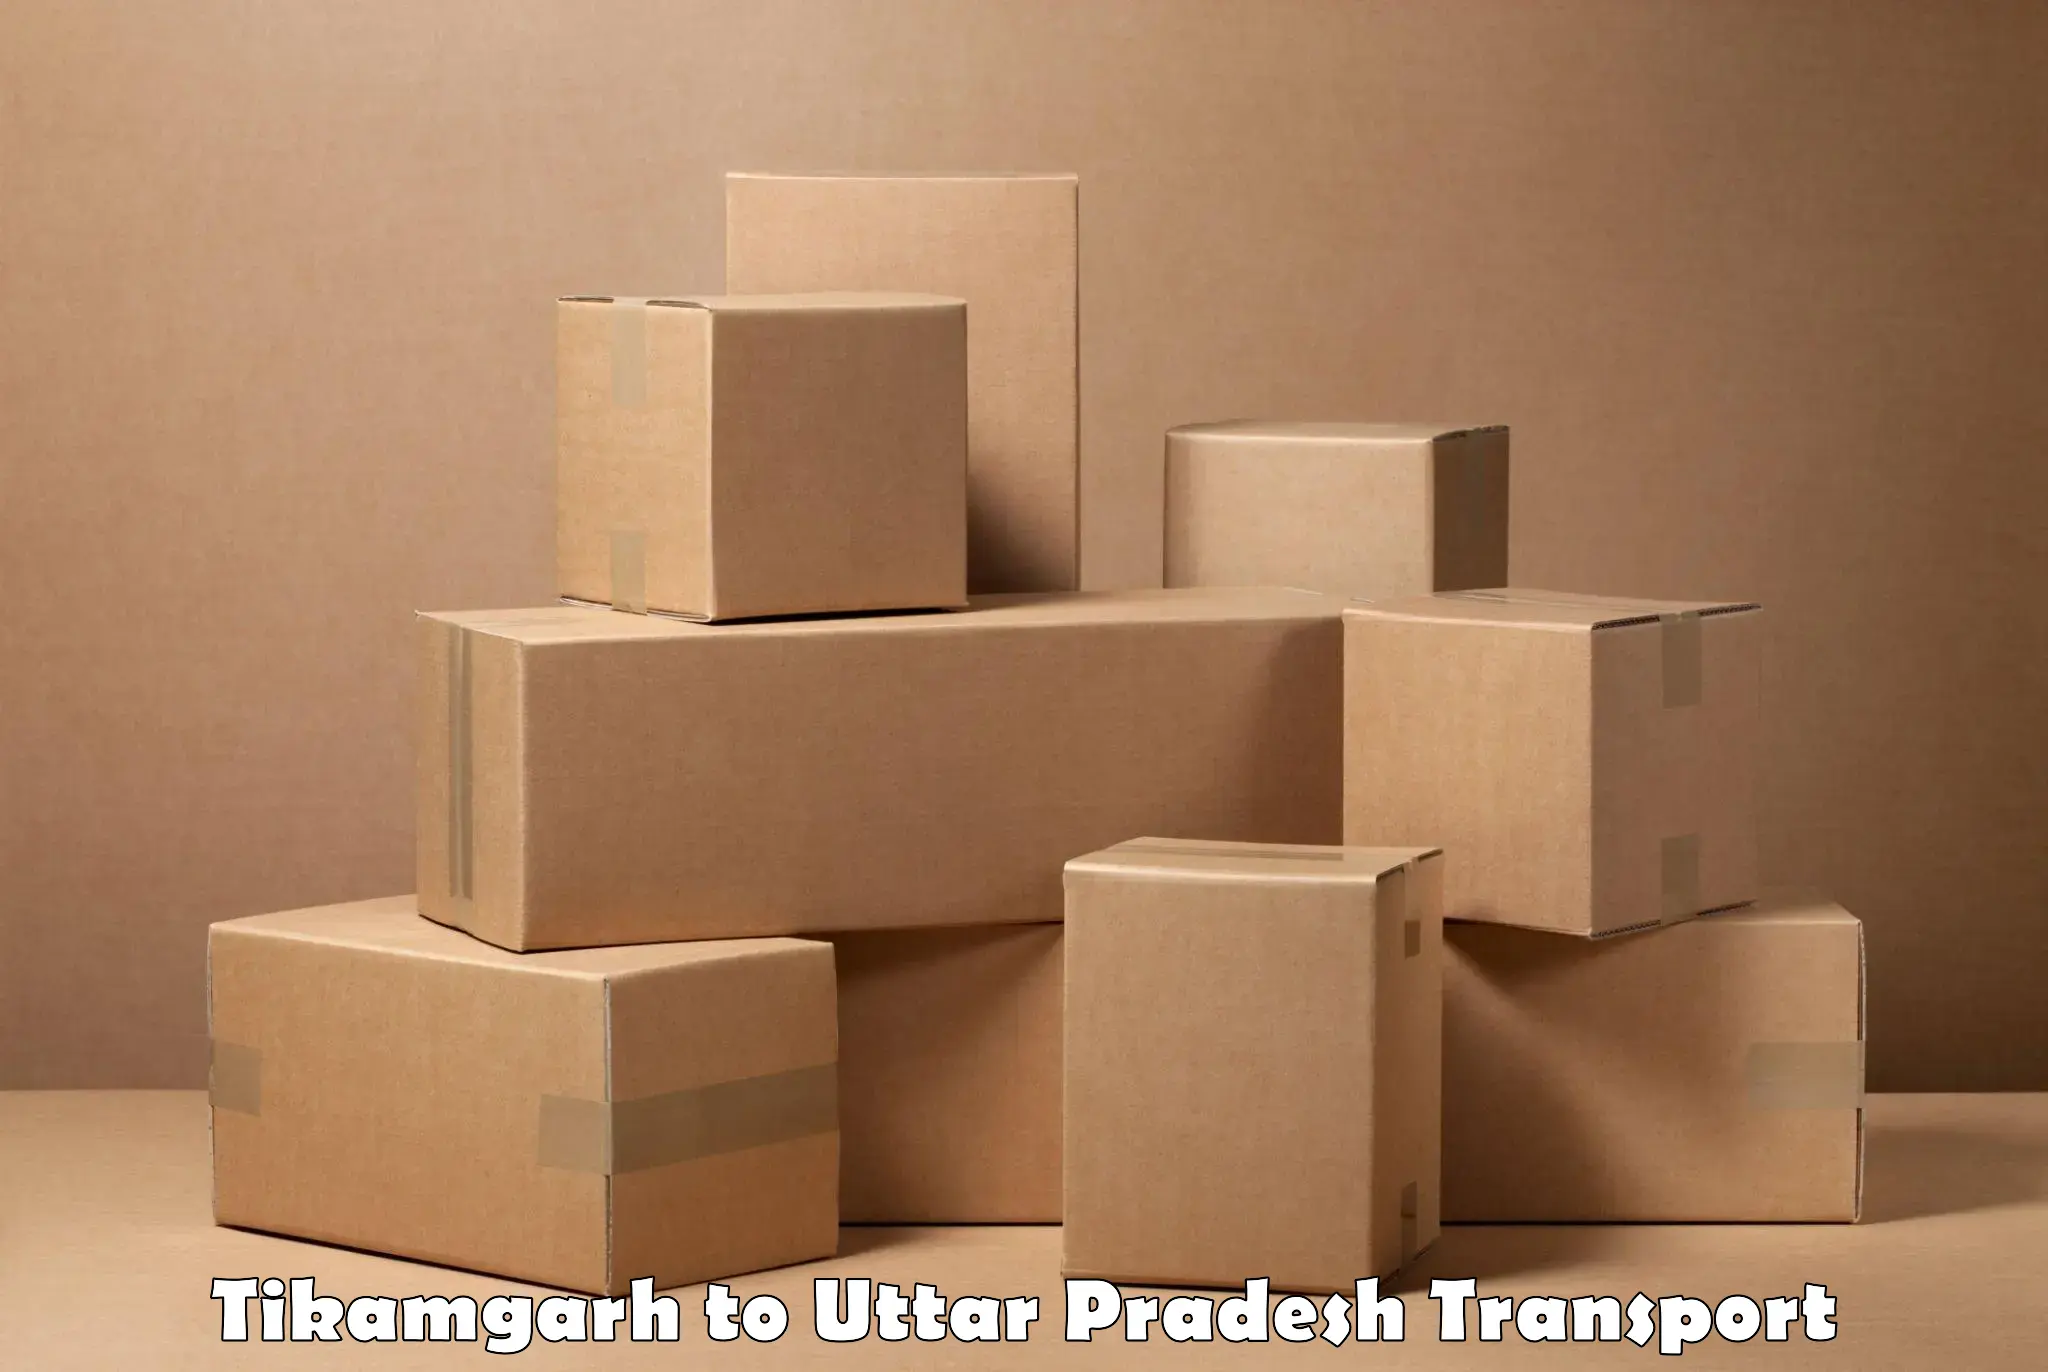 Delivery service Tikamgarh to Deoband